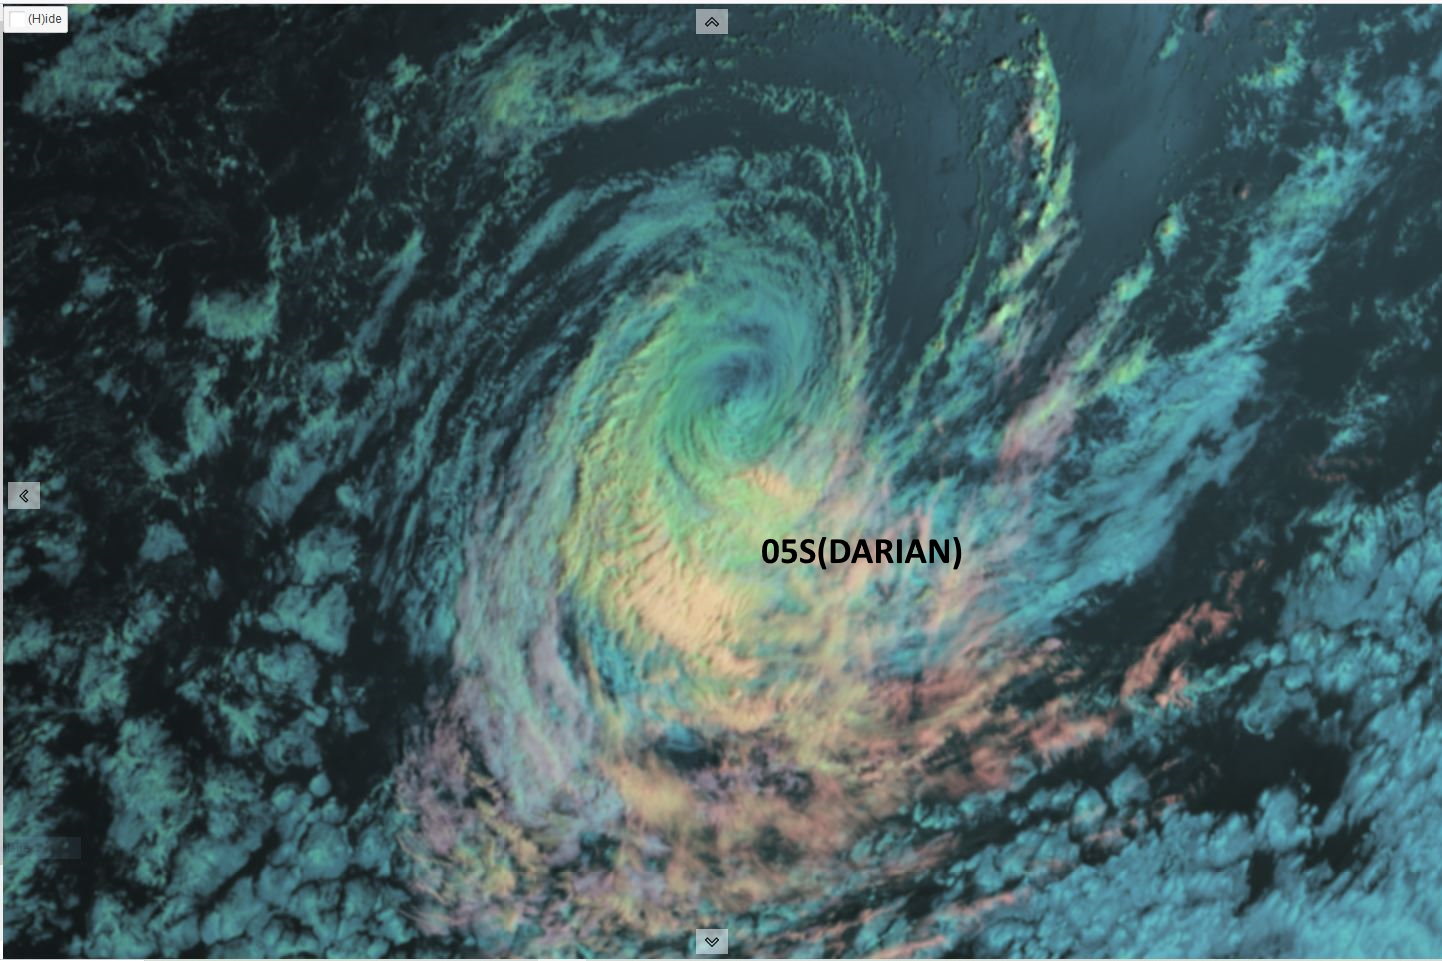 SATELLITE ANALYSIS, INITIAL POSITION AND INTENSITY DISCUSSION: TROPICAL CYCLONE (TC) 05S HAS CONTINUED TO WEAKEN DUE TO PERSISTENT NORTHERLY VERTICAL WIND SHEAR, COOLER SEA SURFACE TEMPERATURE AND DRY AIR ENTRAINMENT AS EVIDENCED IN ANIMATED MULTISPECTRAL SATELLITE IMAGERY, WHICH SHOWS AN EXPOSED LOW-LEVEL CIRCULATION CENTER (LLCC) WITH RAPIDLY-DECAYING DEEP CONVECTION CONFINED TO THE SOUTHERN SEMICIRCLE. DESPITE THE POOR DEEP CONVECTIVE STRUCTURE, LOW-LEVEL BANDING CONTINUES TO WRAP TIGHTLY INTO A WELL-DEFINED LLCC. ADDITIONALLY, A 272331Z SSMIS 37GHZ MICROWAVE IMAGE REVEALS SHALLOW BANDING WRAPPING INTO A RAGGED BUT DEFINED LLCC, WHICH, ALONG WITH THE MSI, SUPPORTS THE INITIAL POSITION WITH HIGH CONFIDENCE. A RECENT 271953Z AMSR2 WINDSPEED IMAGE INDICATES AN ASYMMETRIC WIND FIELD BUT SHOWS A SWATH OF 50-61 KNOT WINDS OVER THE SOUTHERN QUADRANT, THEREFORE, THE INITIAL INTENSITY IS HELD AT 60 KNOTS. THIS ESTIMATE IS CONSISTENT WITH THE DVORAK CURRENT INTENSITY ESTIMATES AS WELL AS THE CIMSS SATCON ESTIMATE.